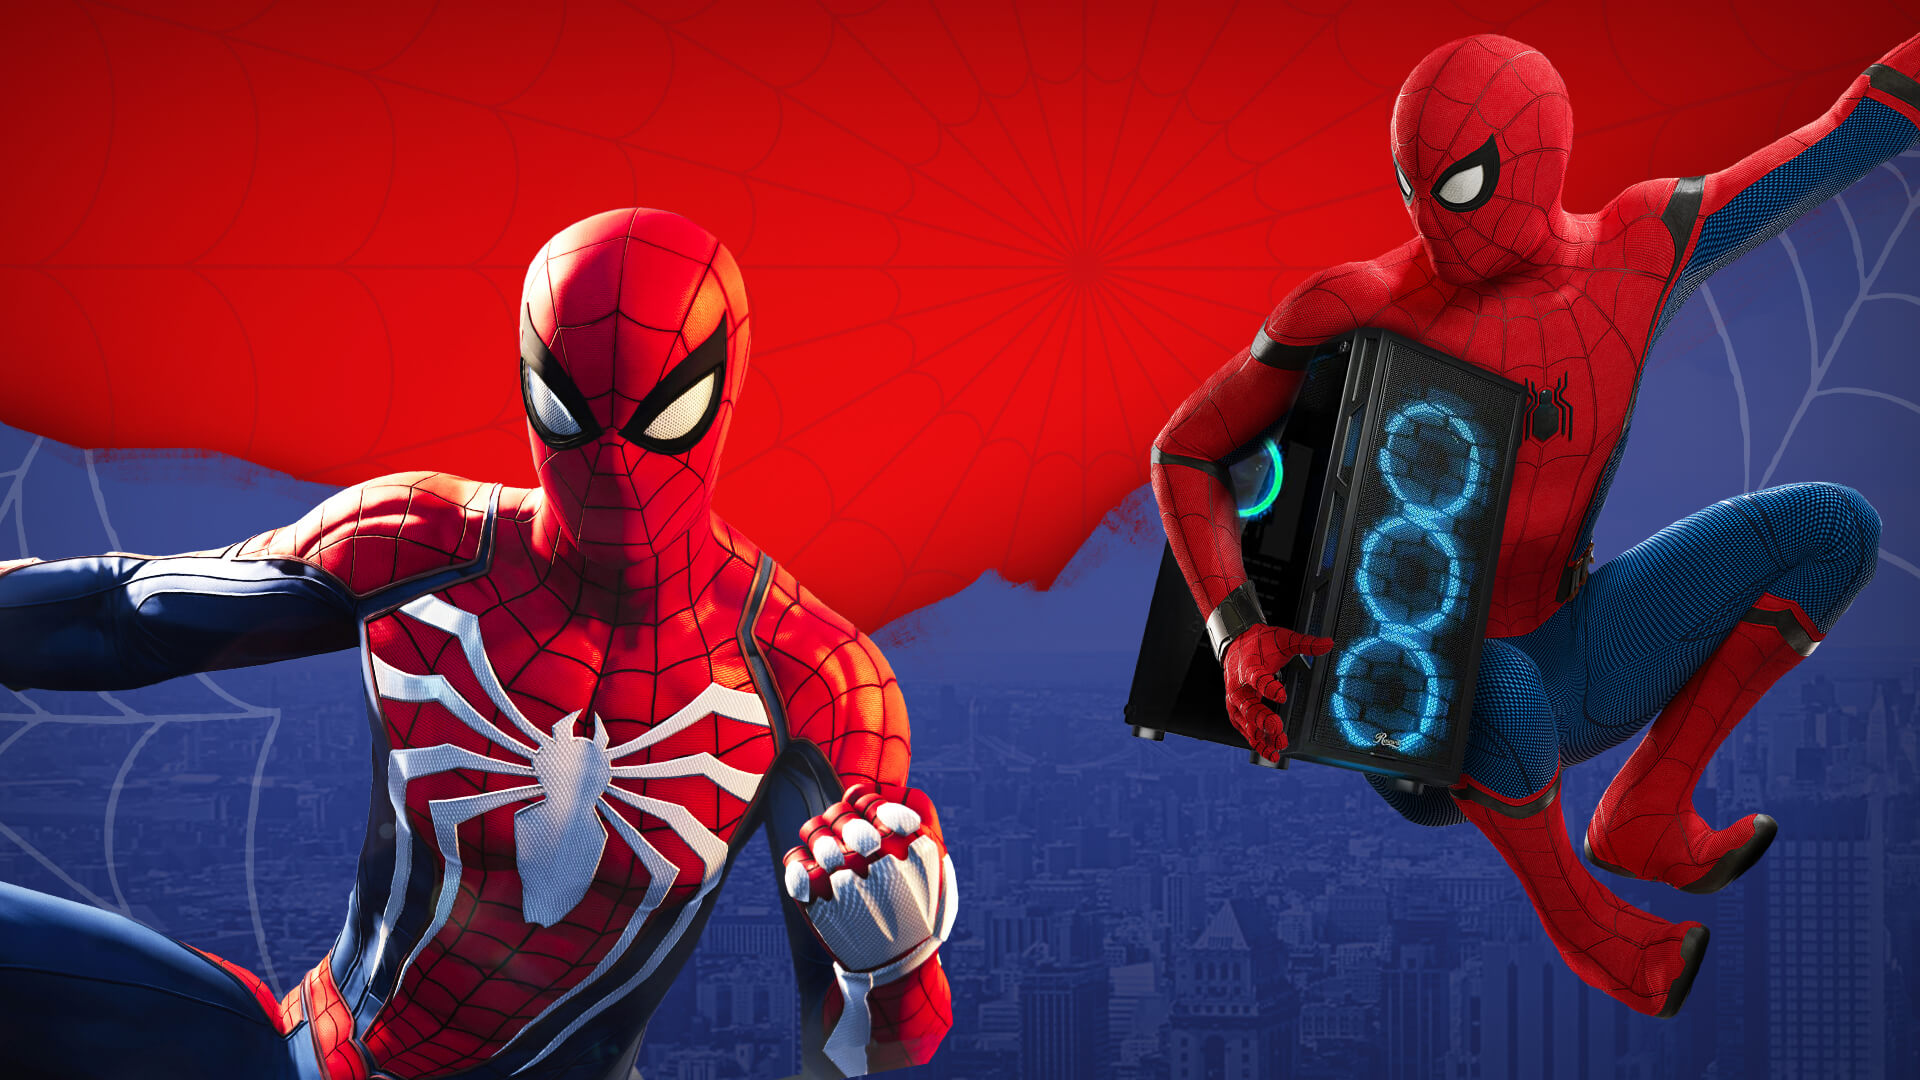 One of the best PlayStation games is coming to PC, and yes, it's Spider-Man!